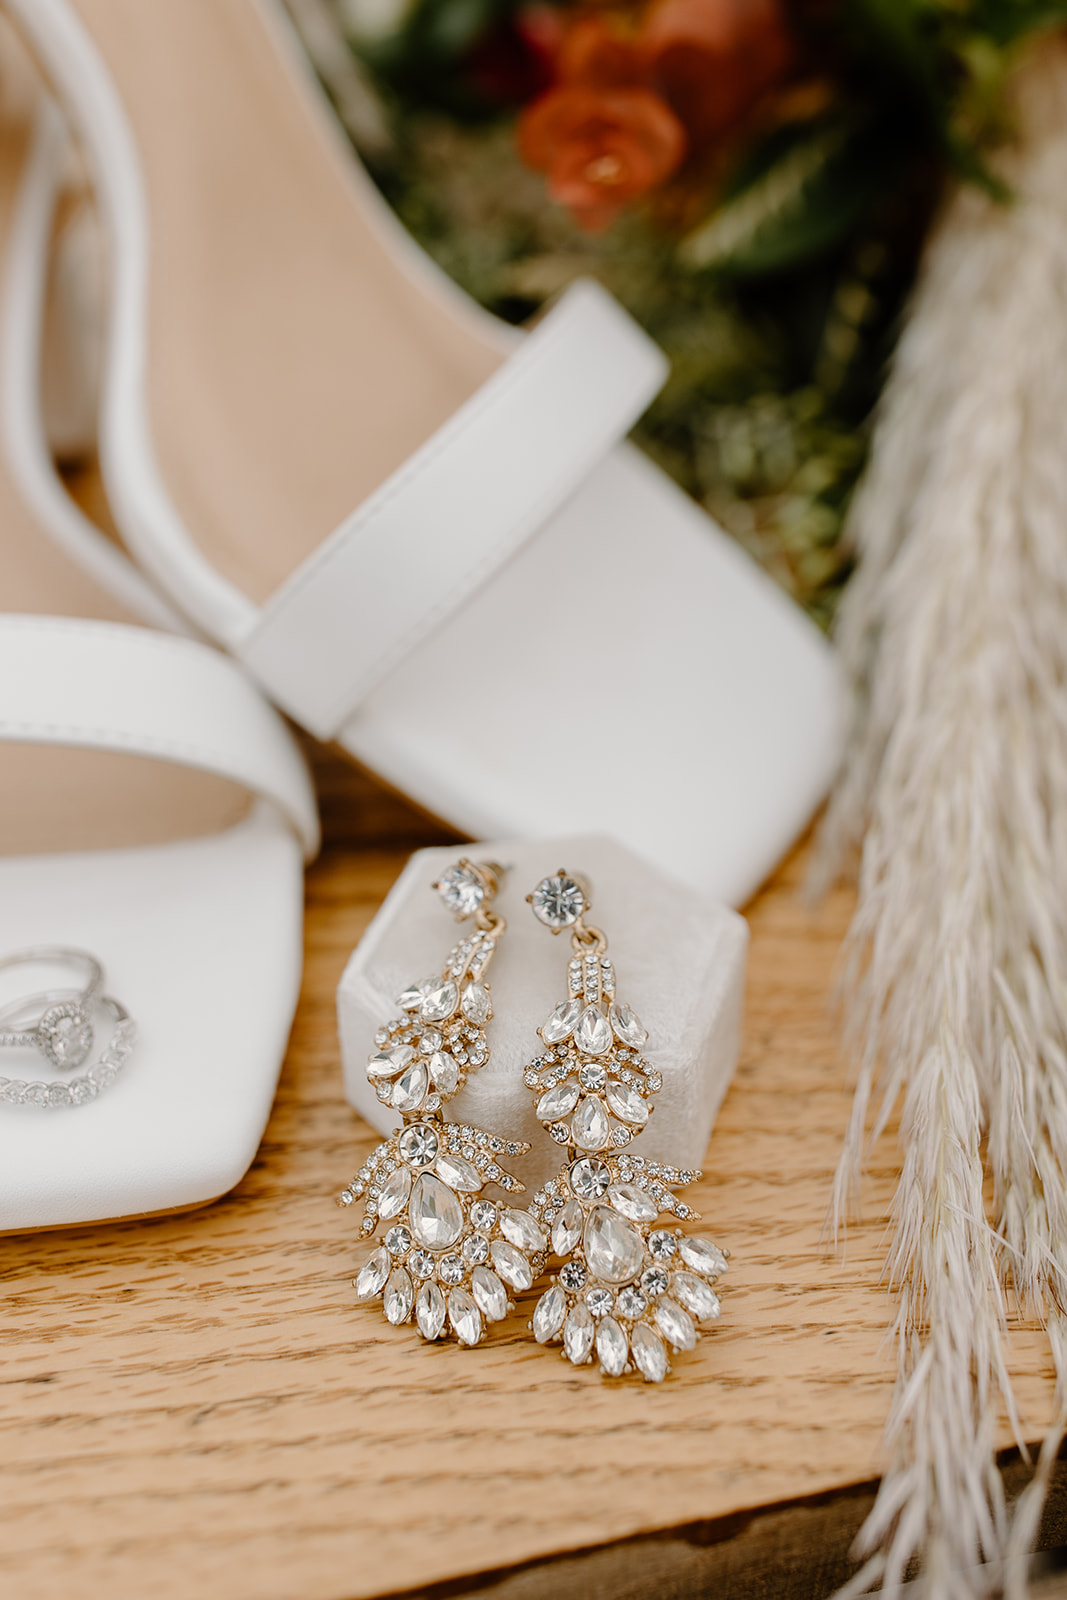 Bridal shoes with rings and earrings